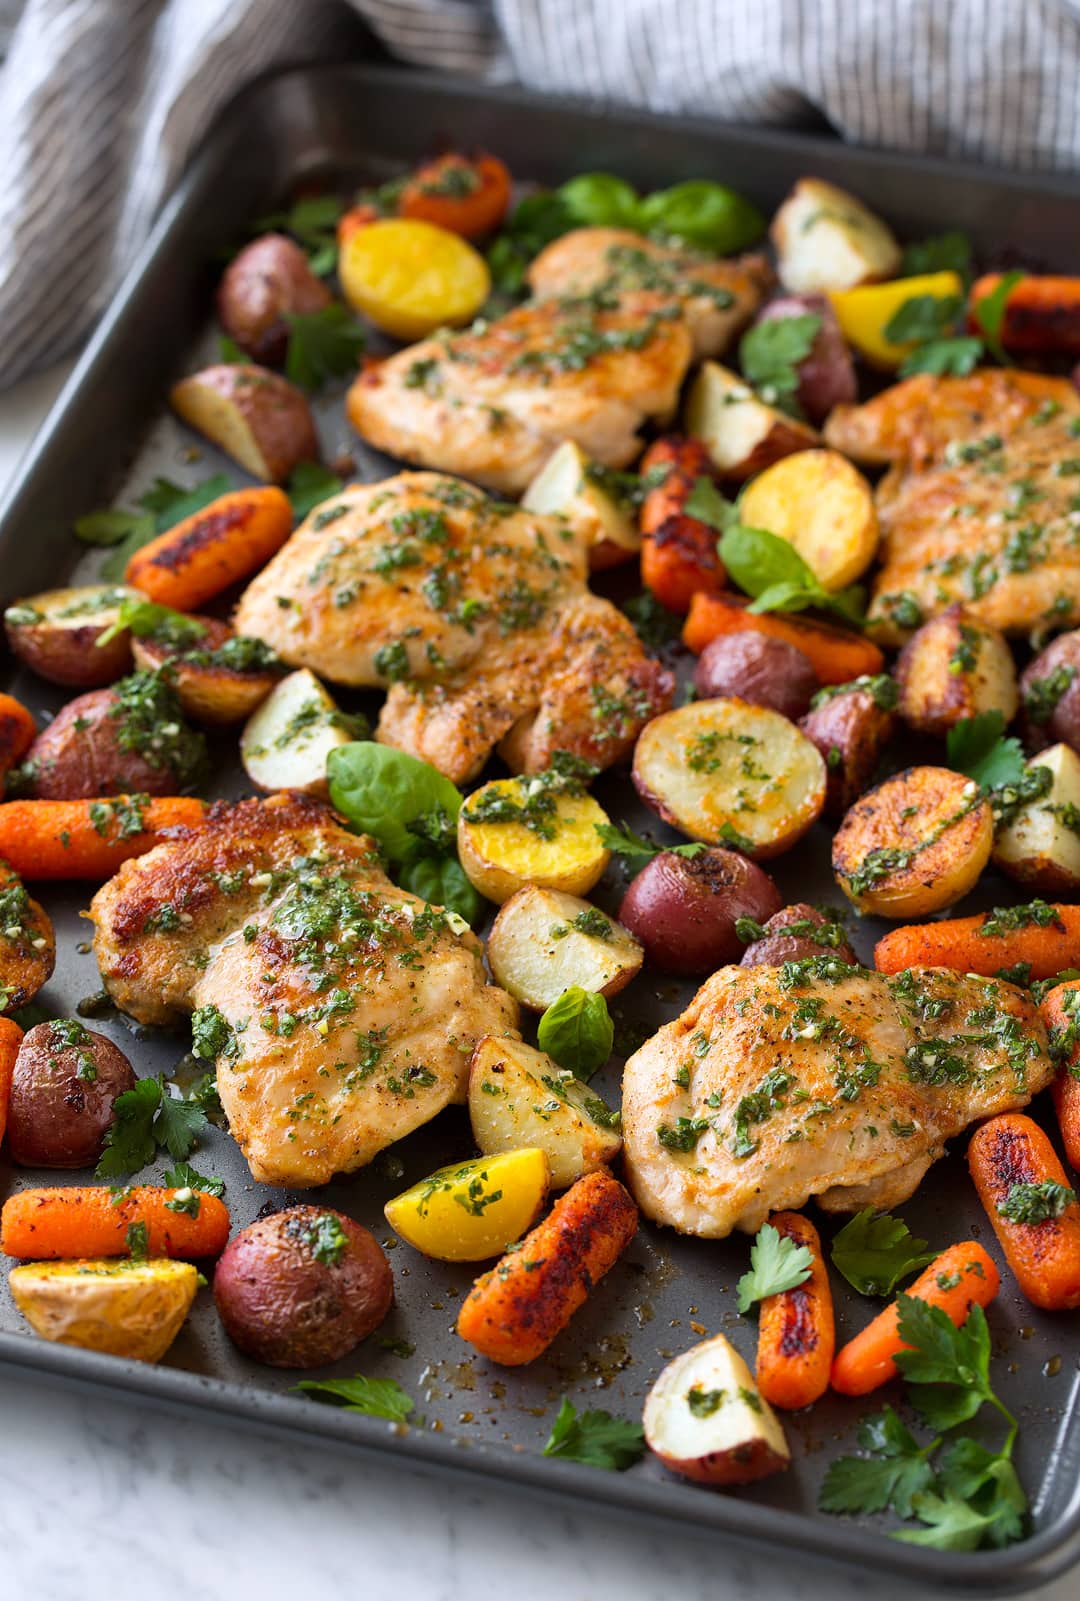 Roasted Chicken and Veggies with Herb Vinaigrette